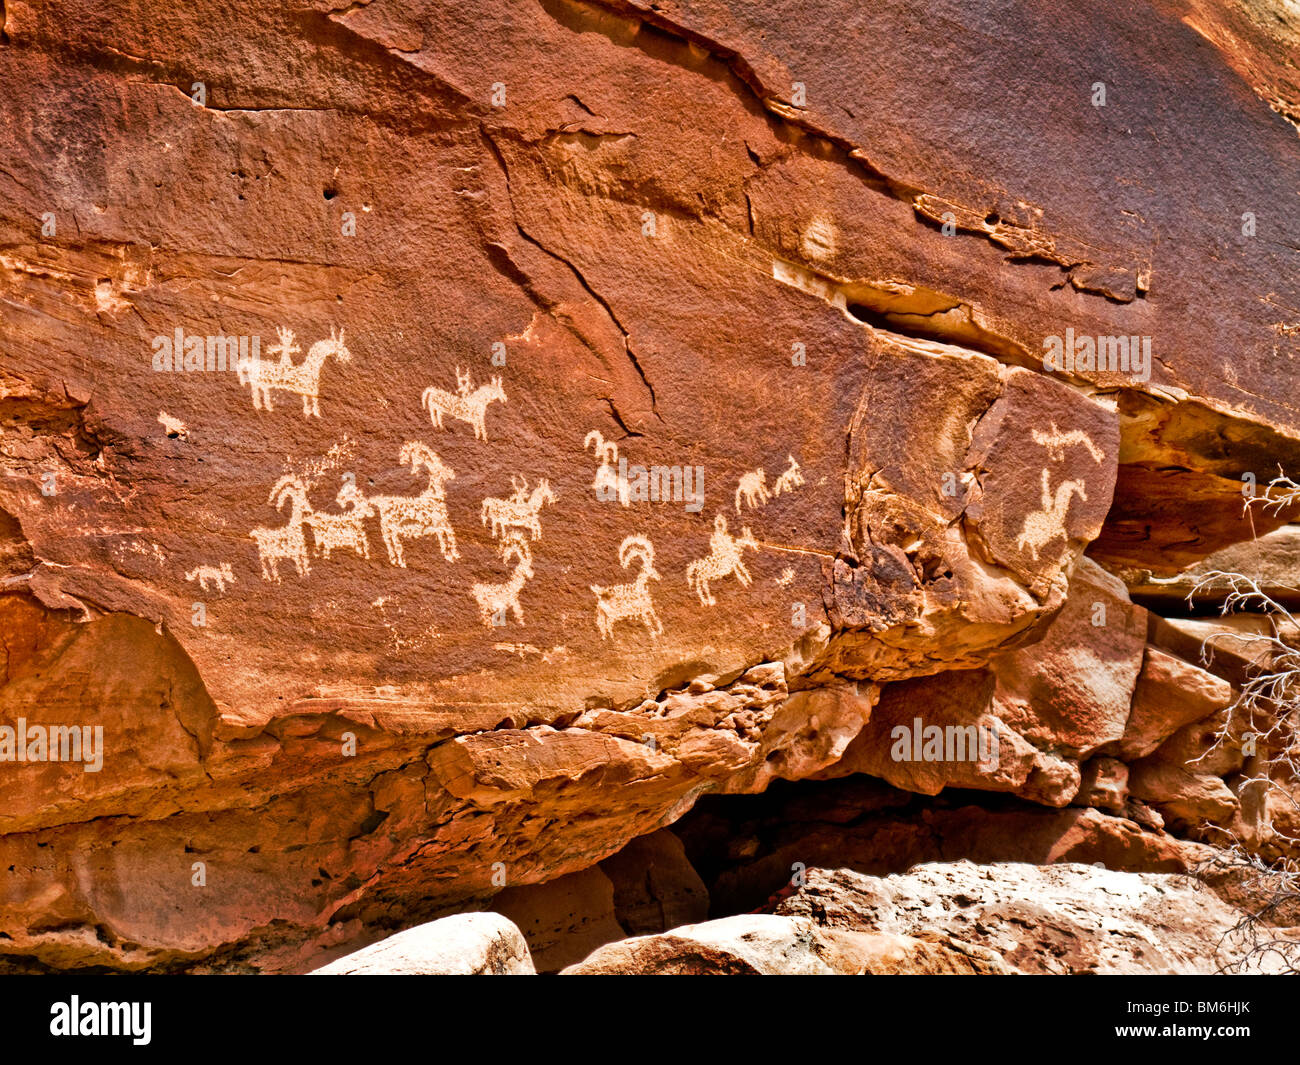 Ute Indian petroglyphs in Entrada Sandstone in Arches National Park, Utah dating from between 1650 and 1850. Stock Photo